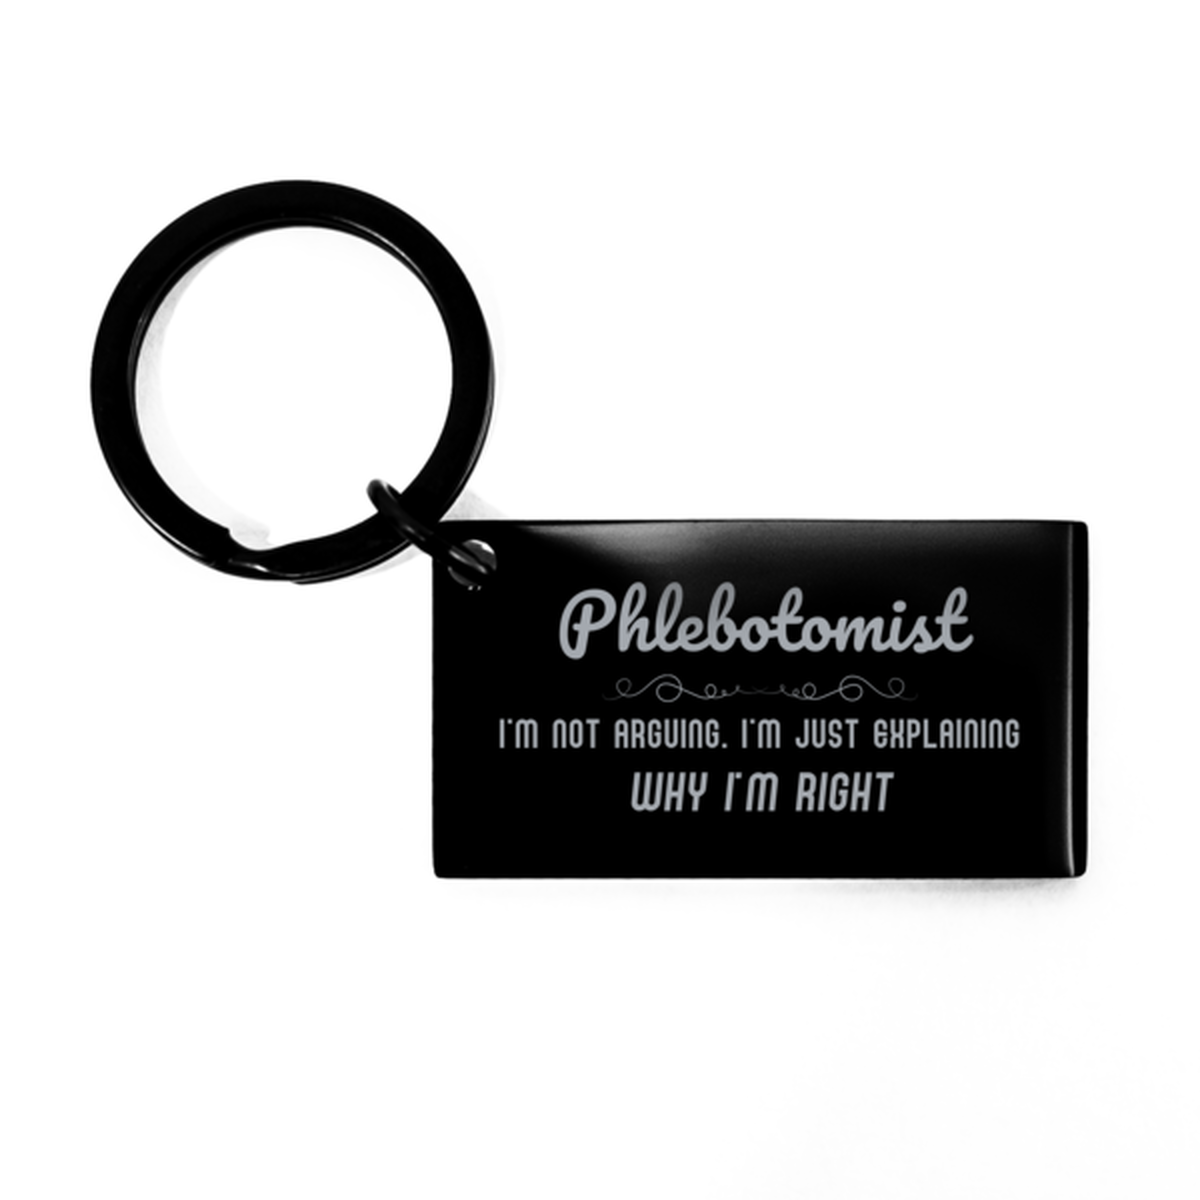 Phlebotomist I'm not Arguing. I'm Just Explaining Why I'm RIGHT Keychain, Funny Saying Quote Phlebotomist Gifts For Phlebotomist Graduation Birthday Christmas Gifts for Men Women Coworker